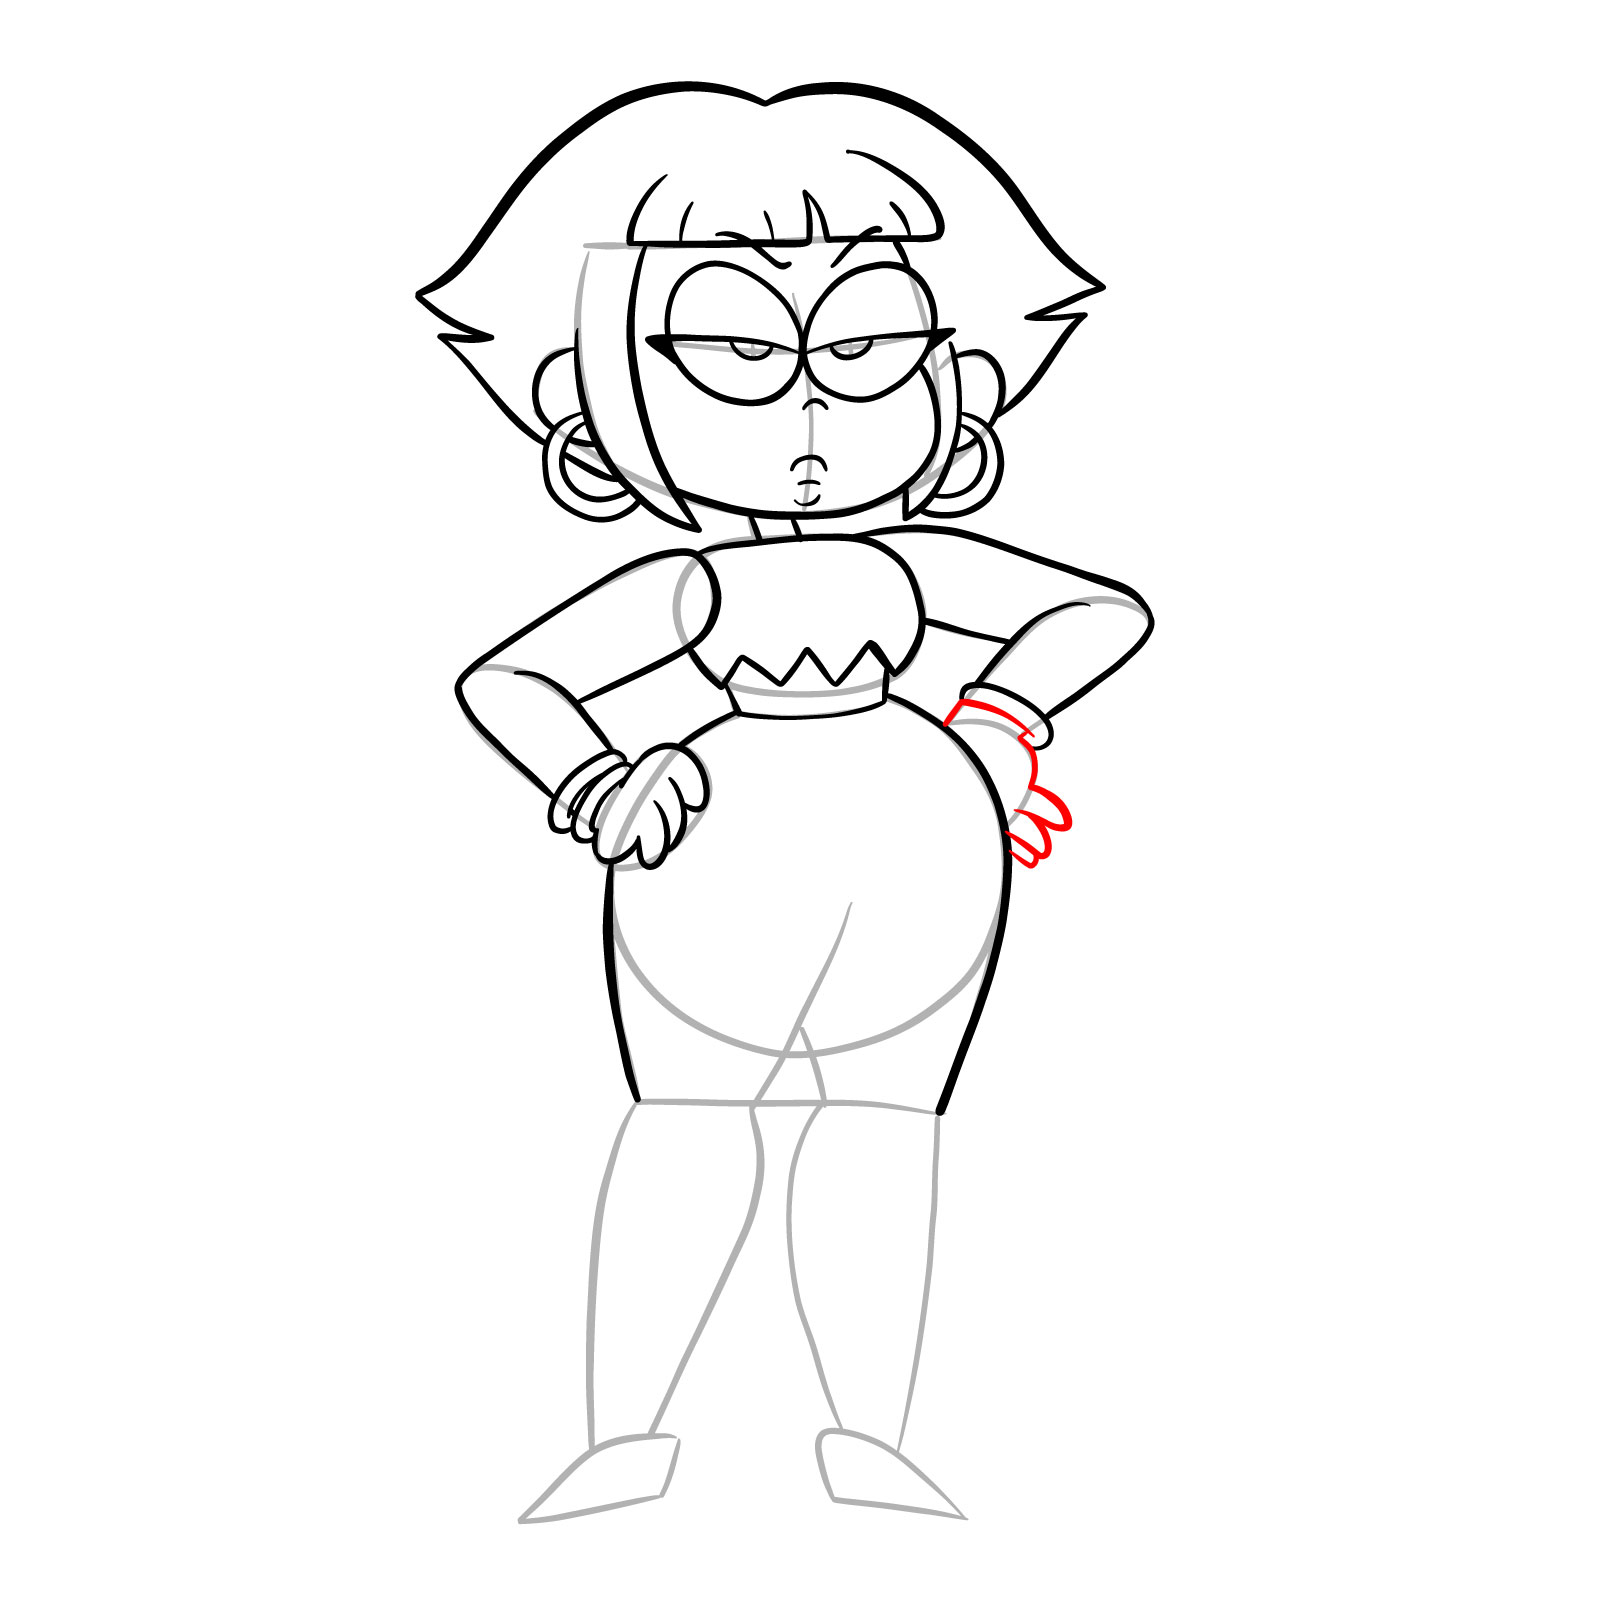 How to draw Human Shannon from OK K.O.! - step 24